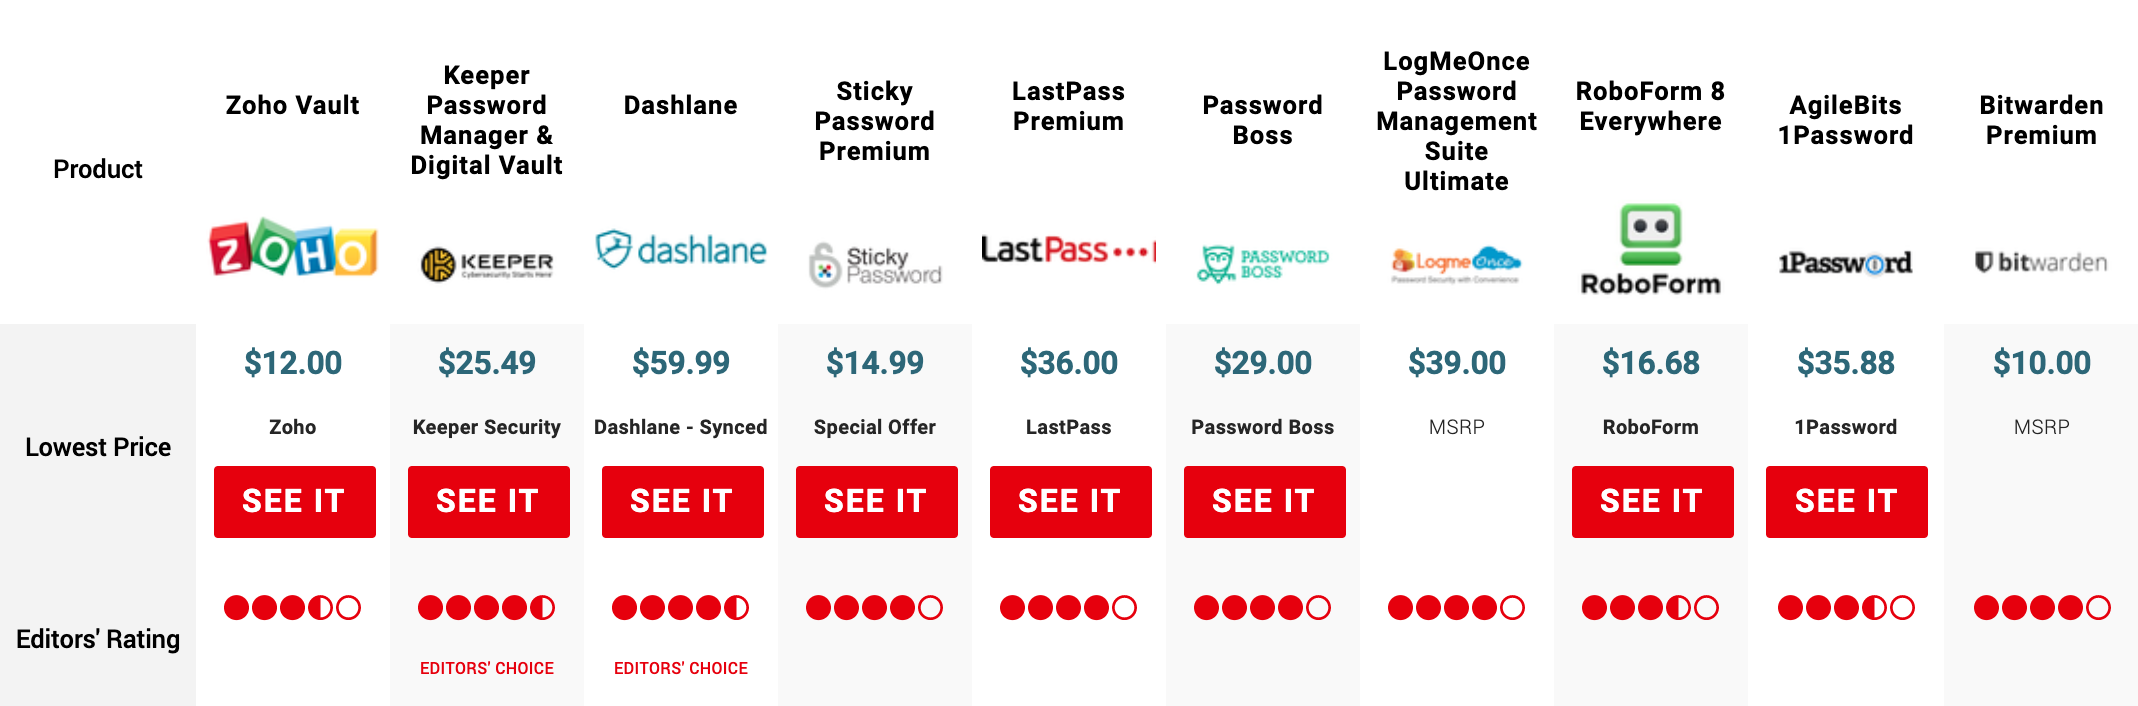 passwords-managers-pcmag